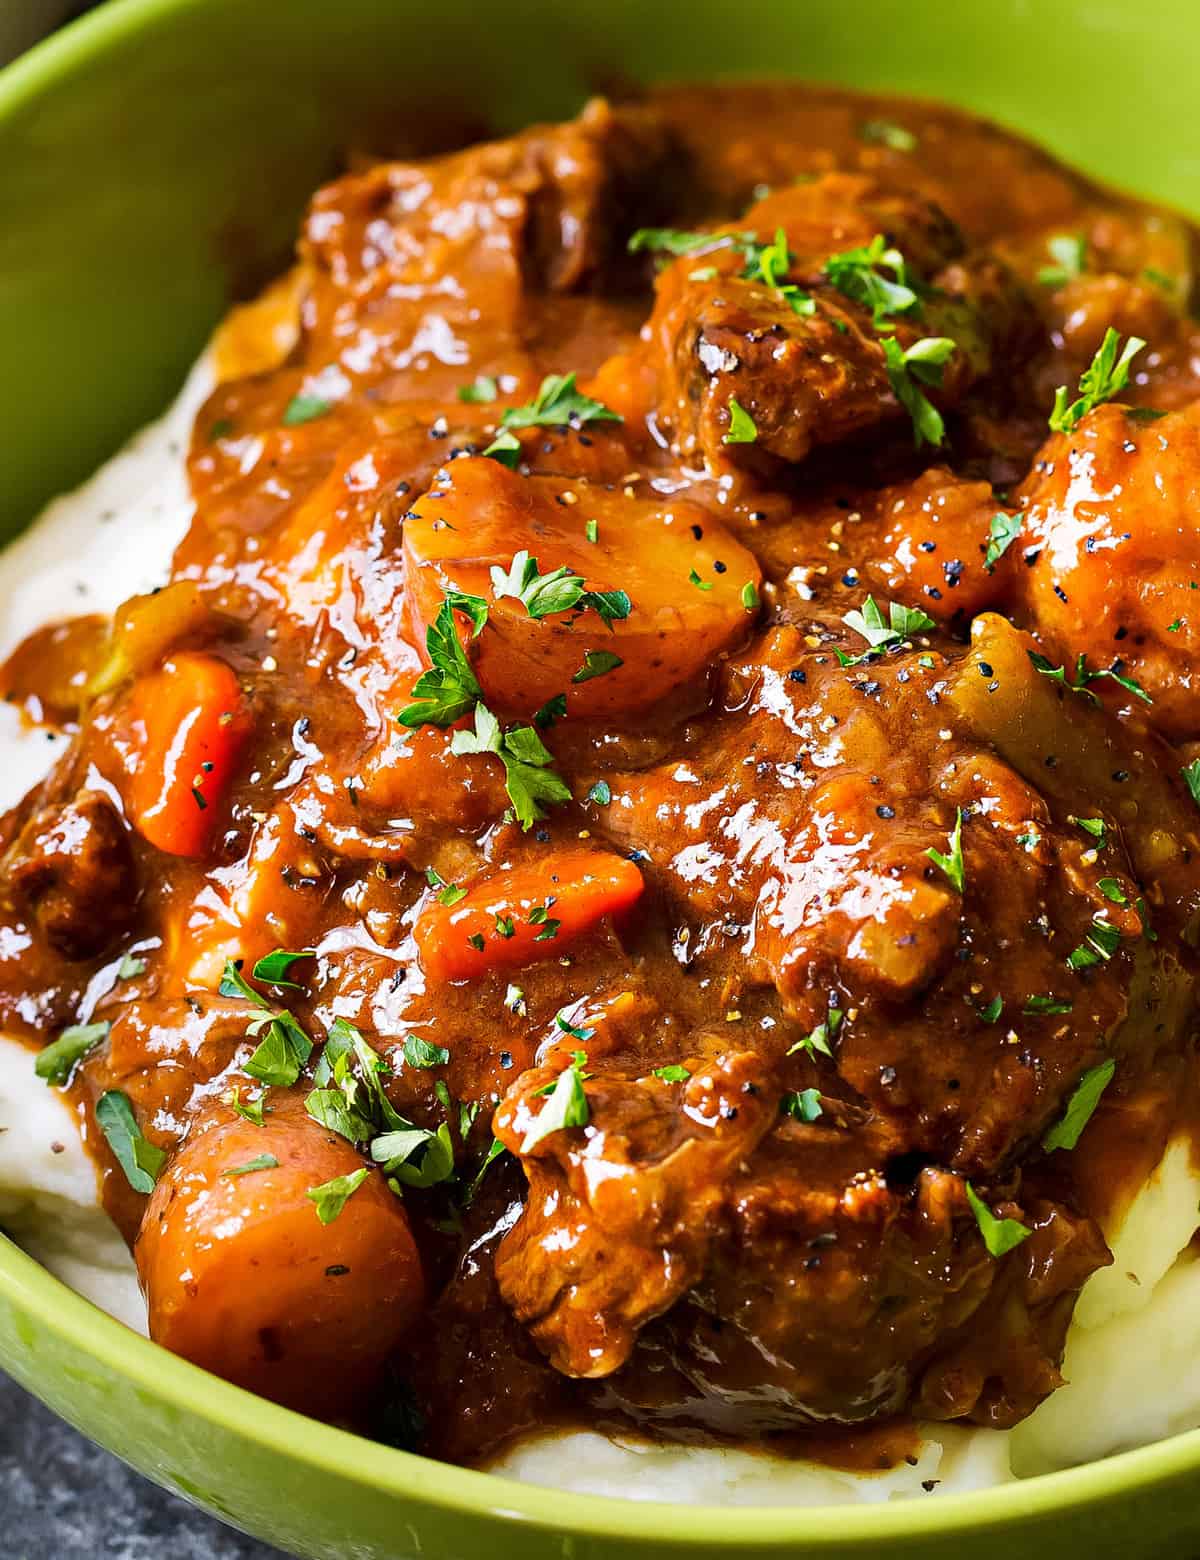 This Guinness beef stew is the only comfort food you’ll need this winter! Rich gravy-like sauce, tender veggies and beef that literally melts in your mouth!